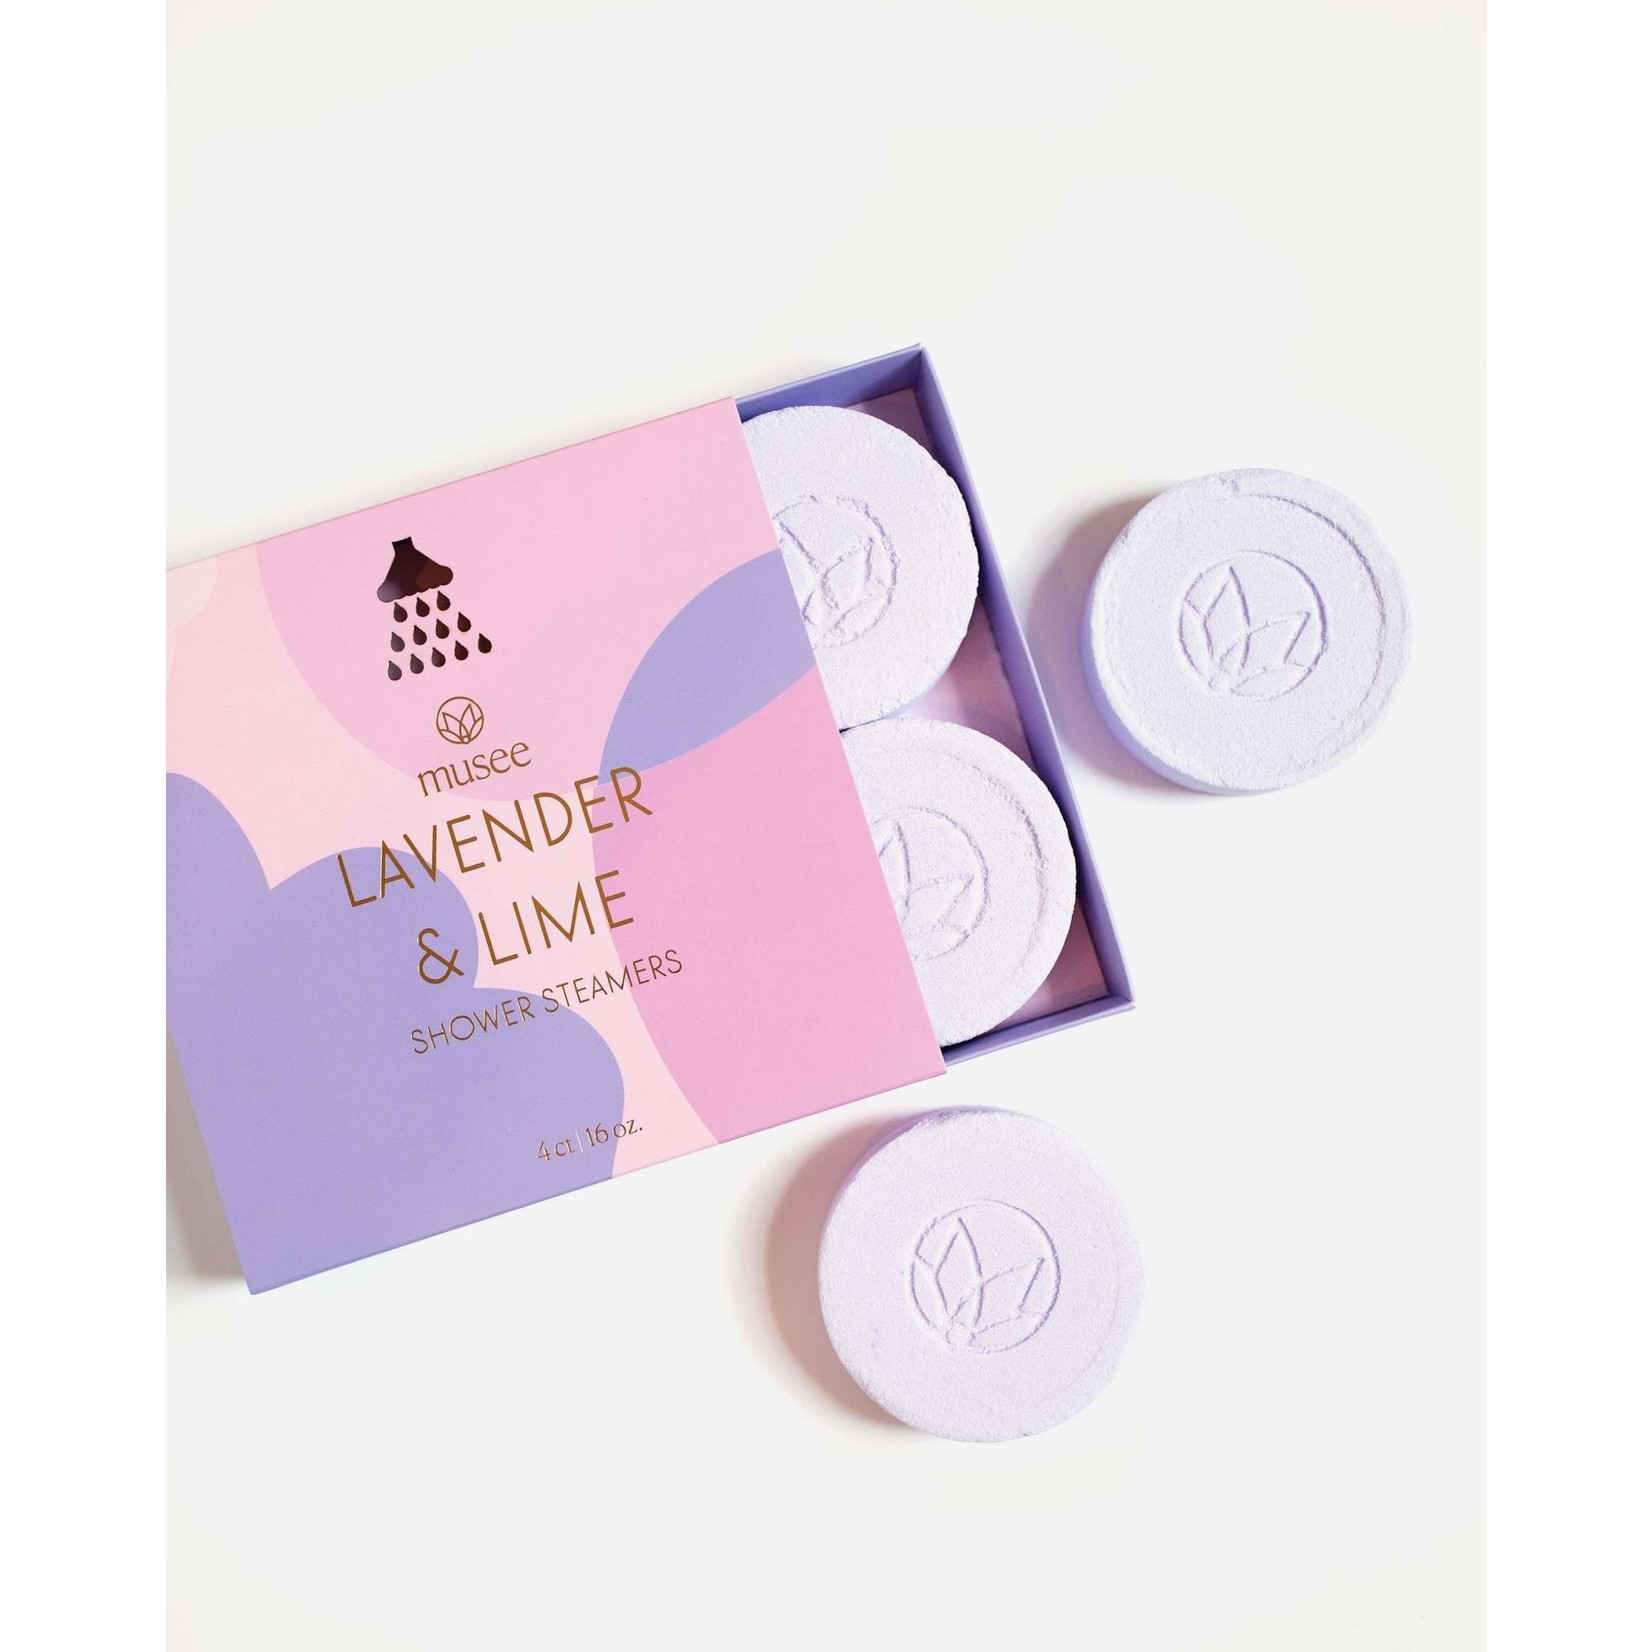 Musee Bath Musee Lavender & Lime Shower Steamers